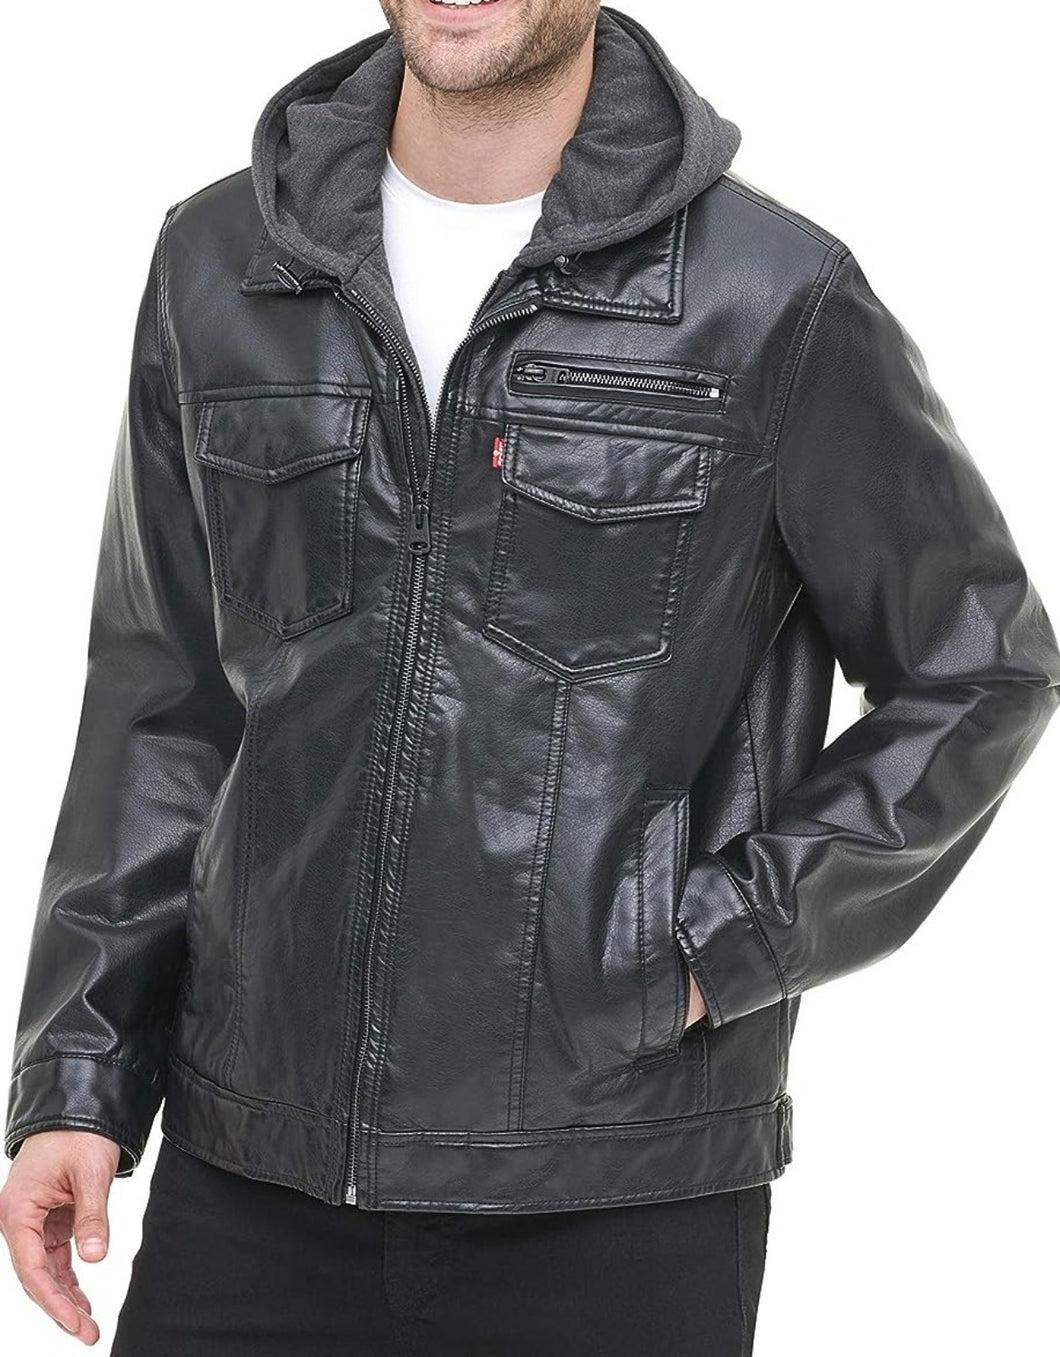 Men's Trucker Hoody with Sherpa Lining Leather jacket